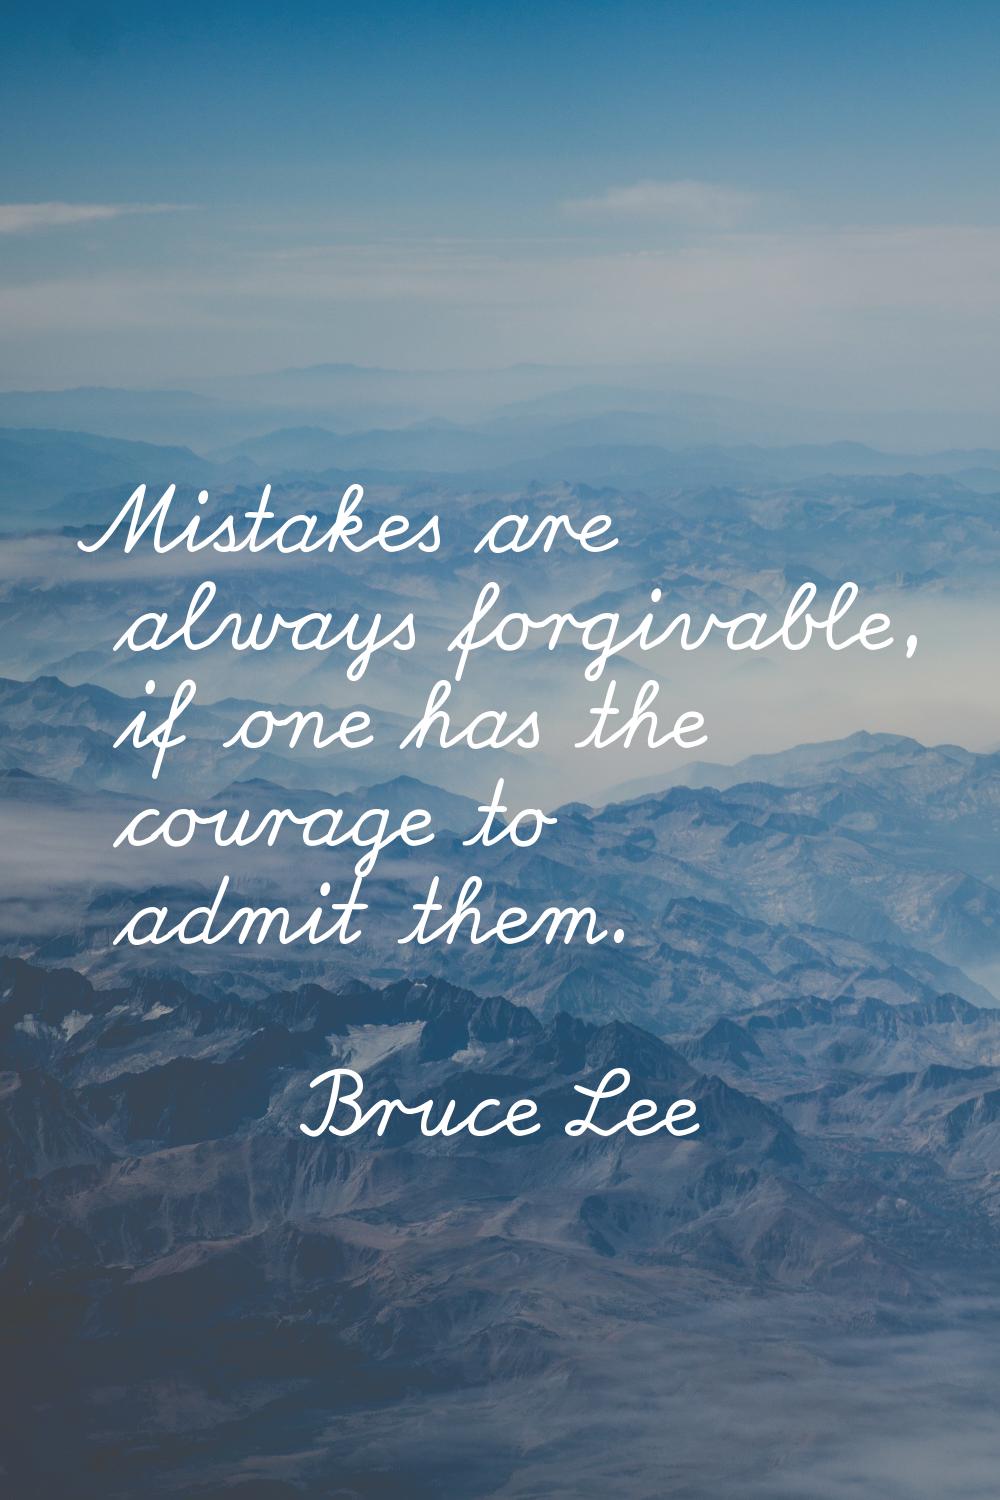 Mistakes are always forgivable, if one has the courage to admit them.